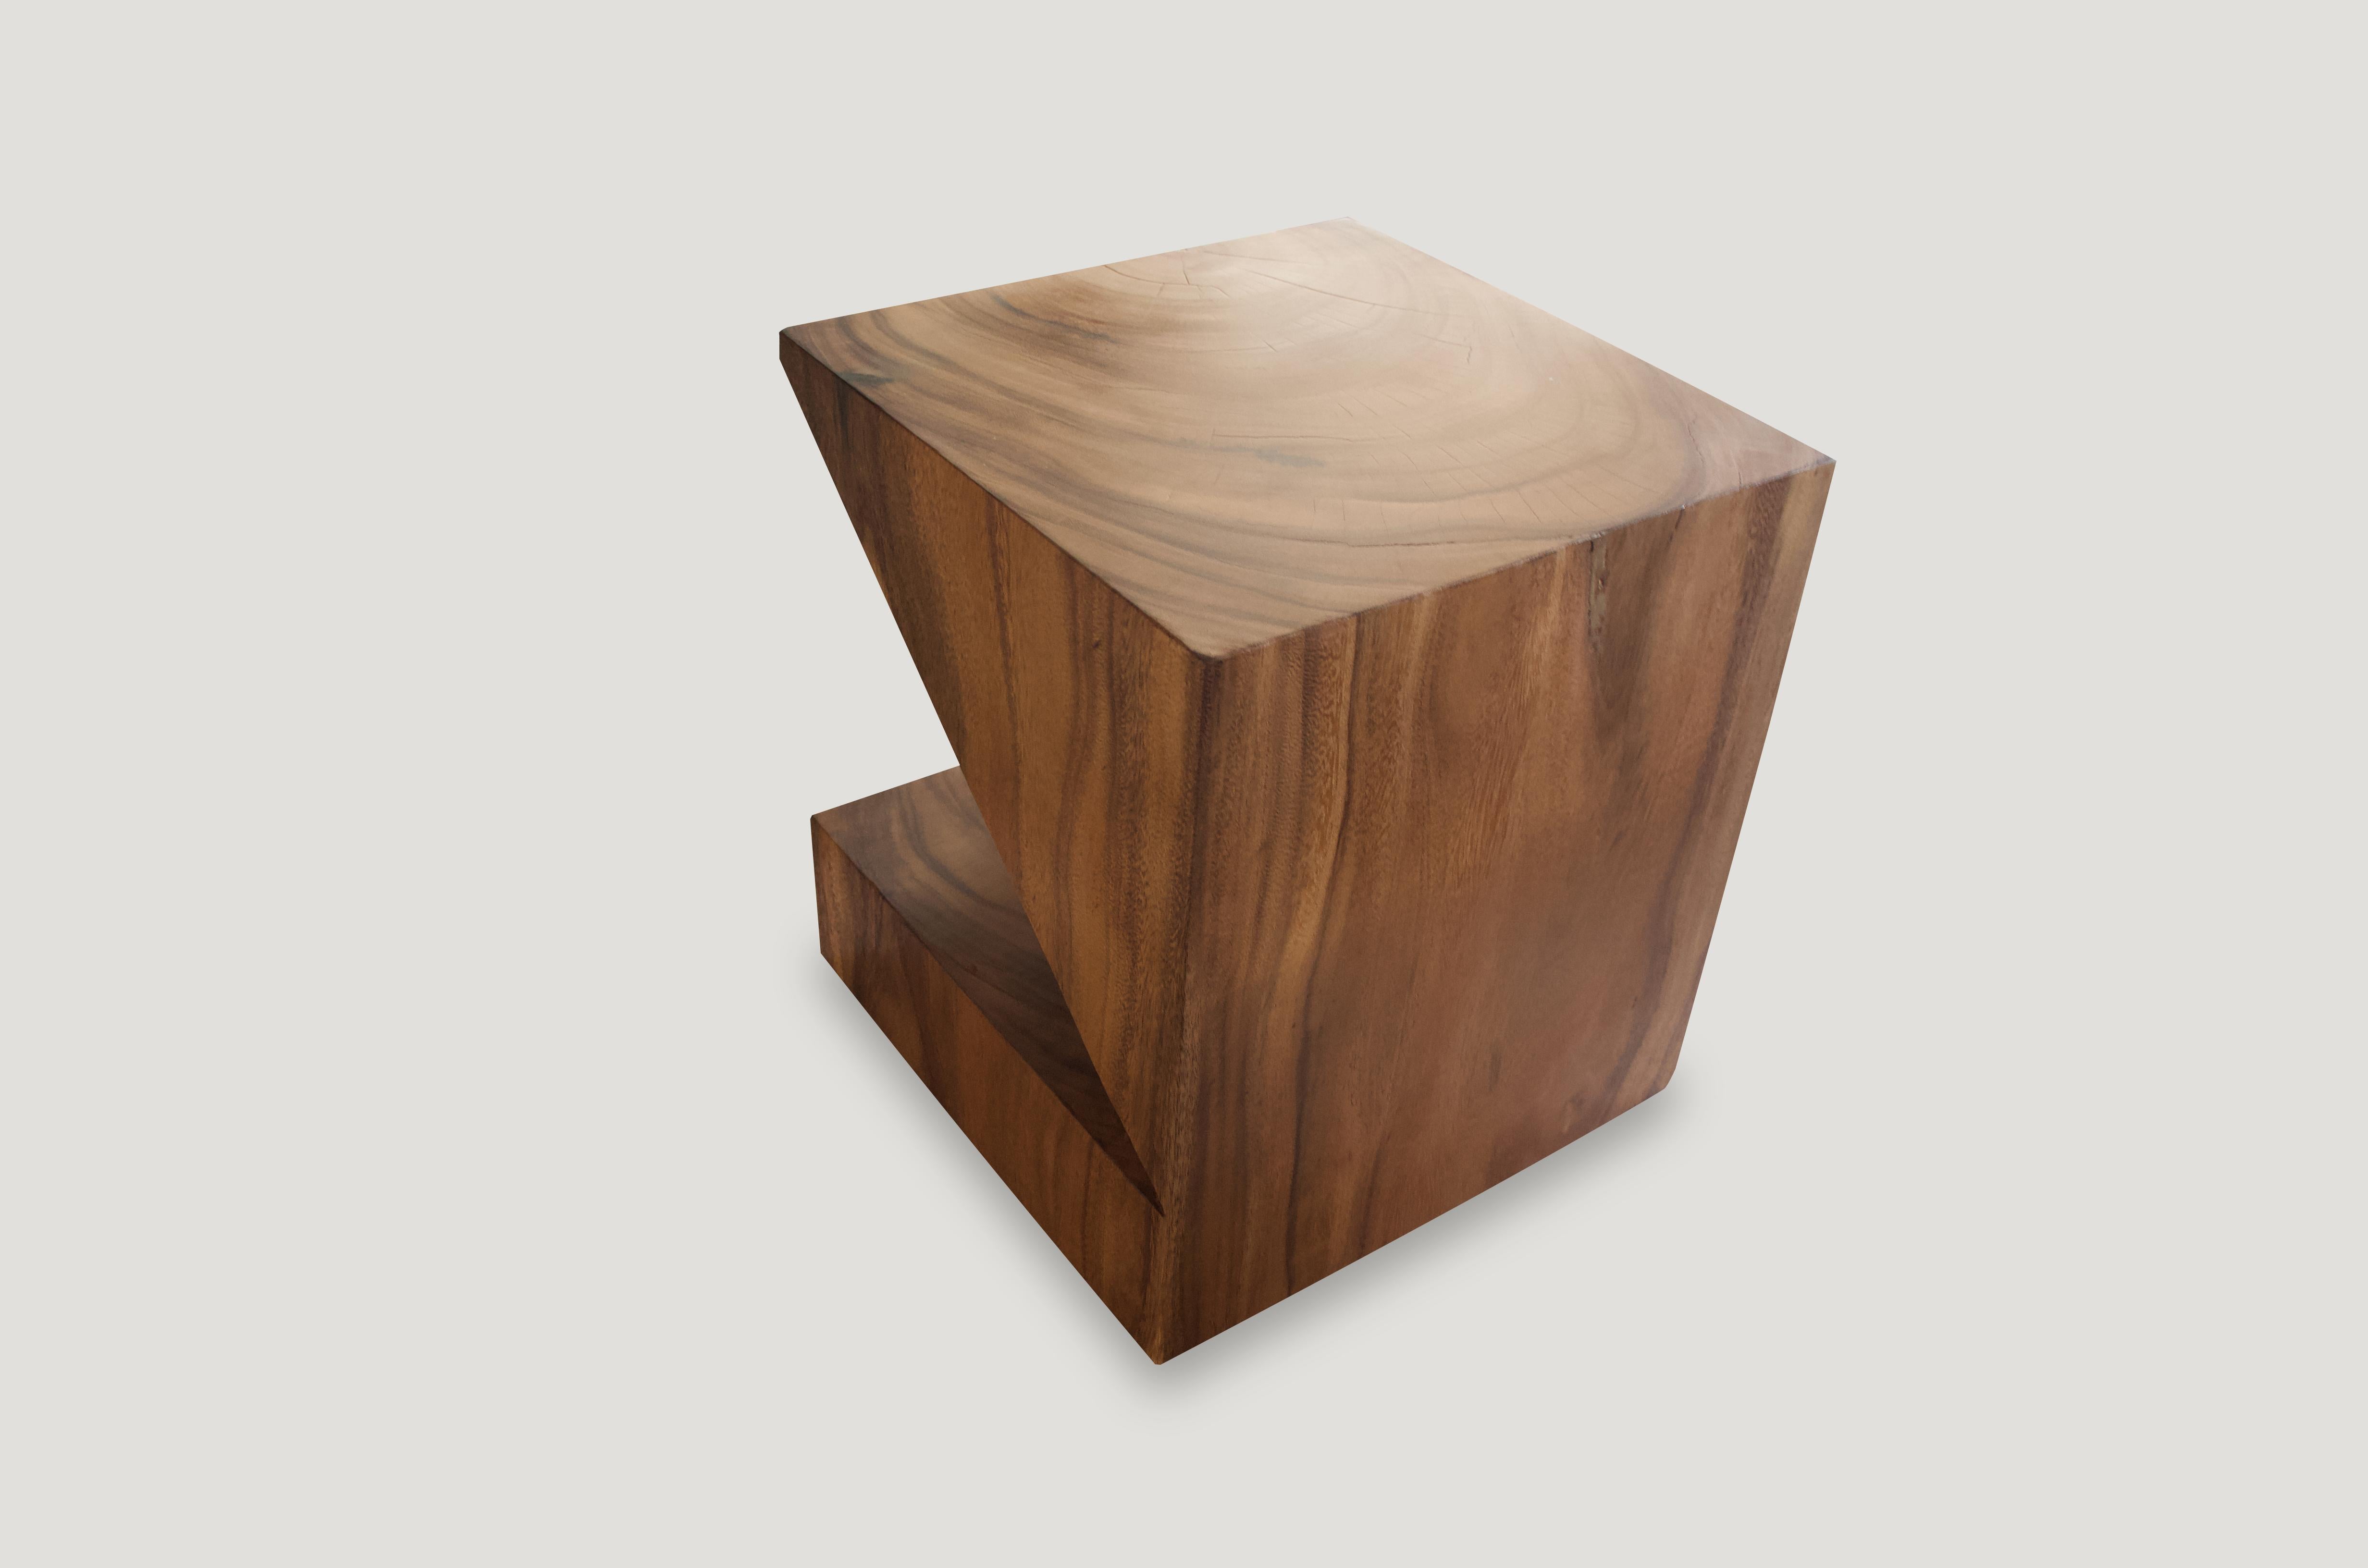 Andrianna Shamaris Wooden Origami Suar Wood Side Table In Excellent Condition For Sale In New York, NY